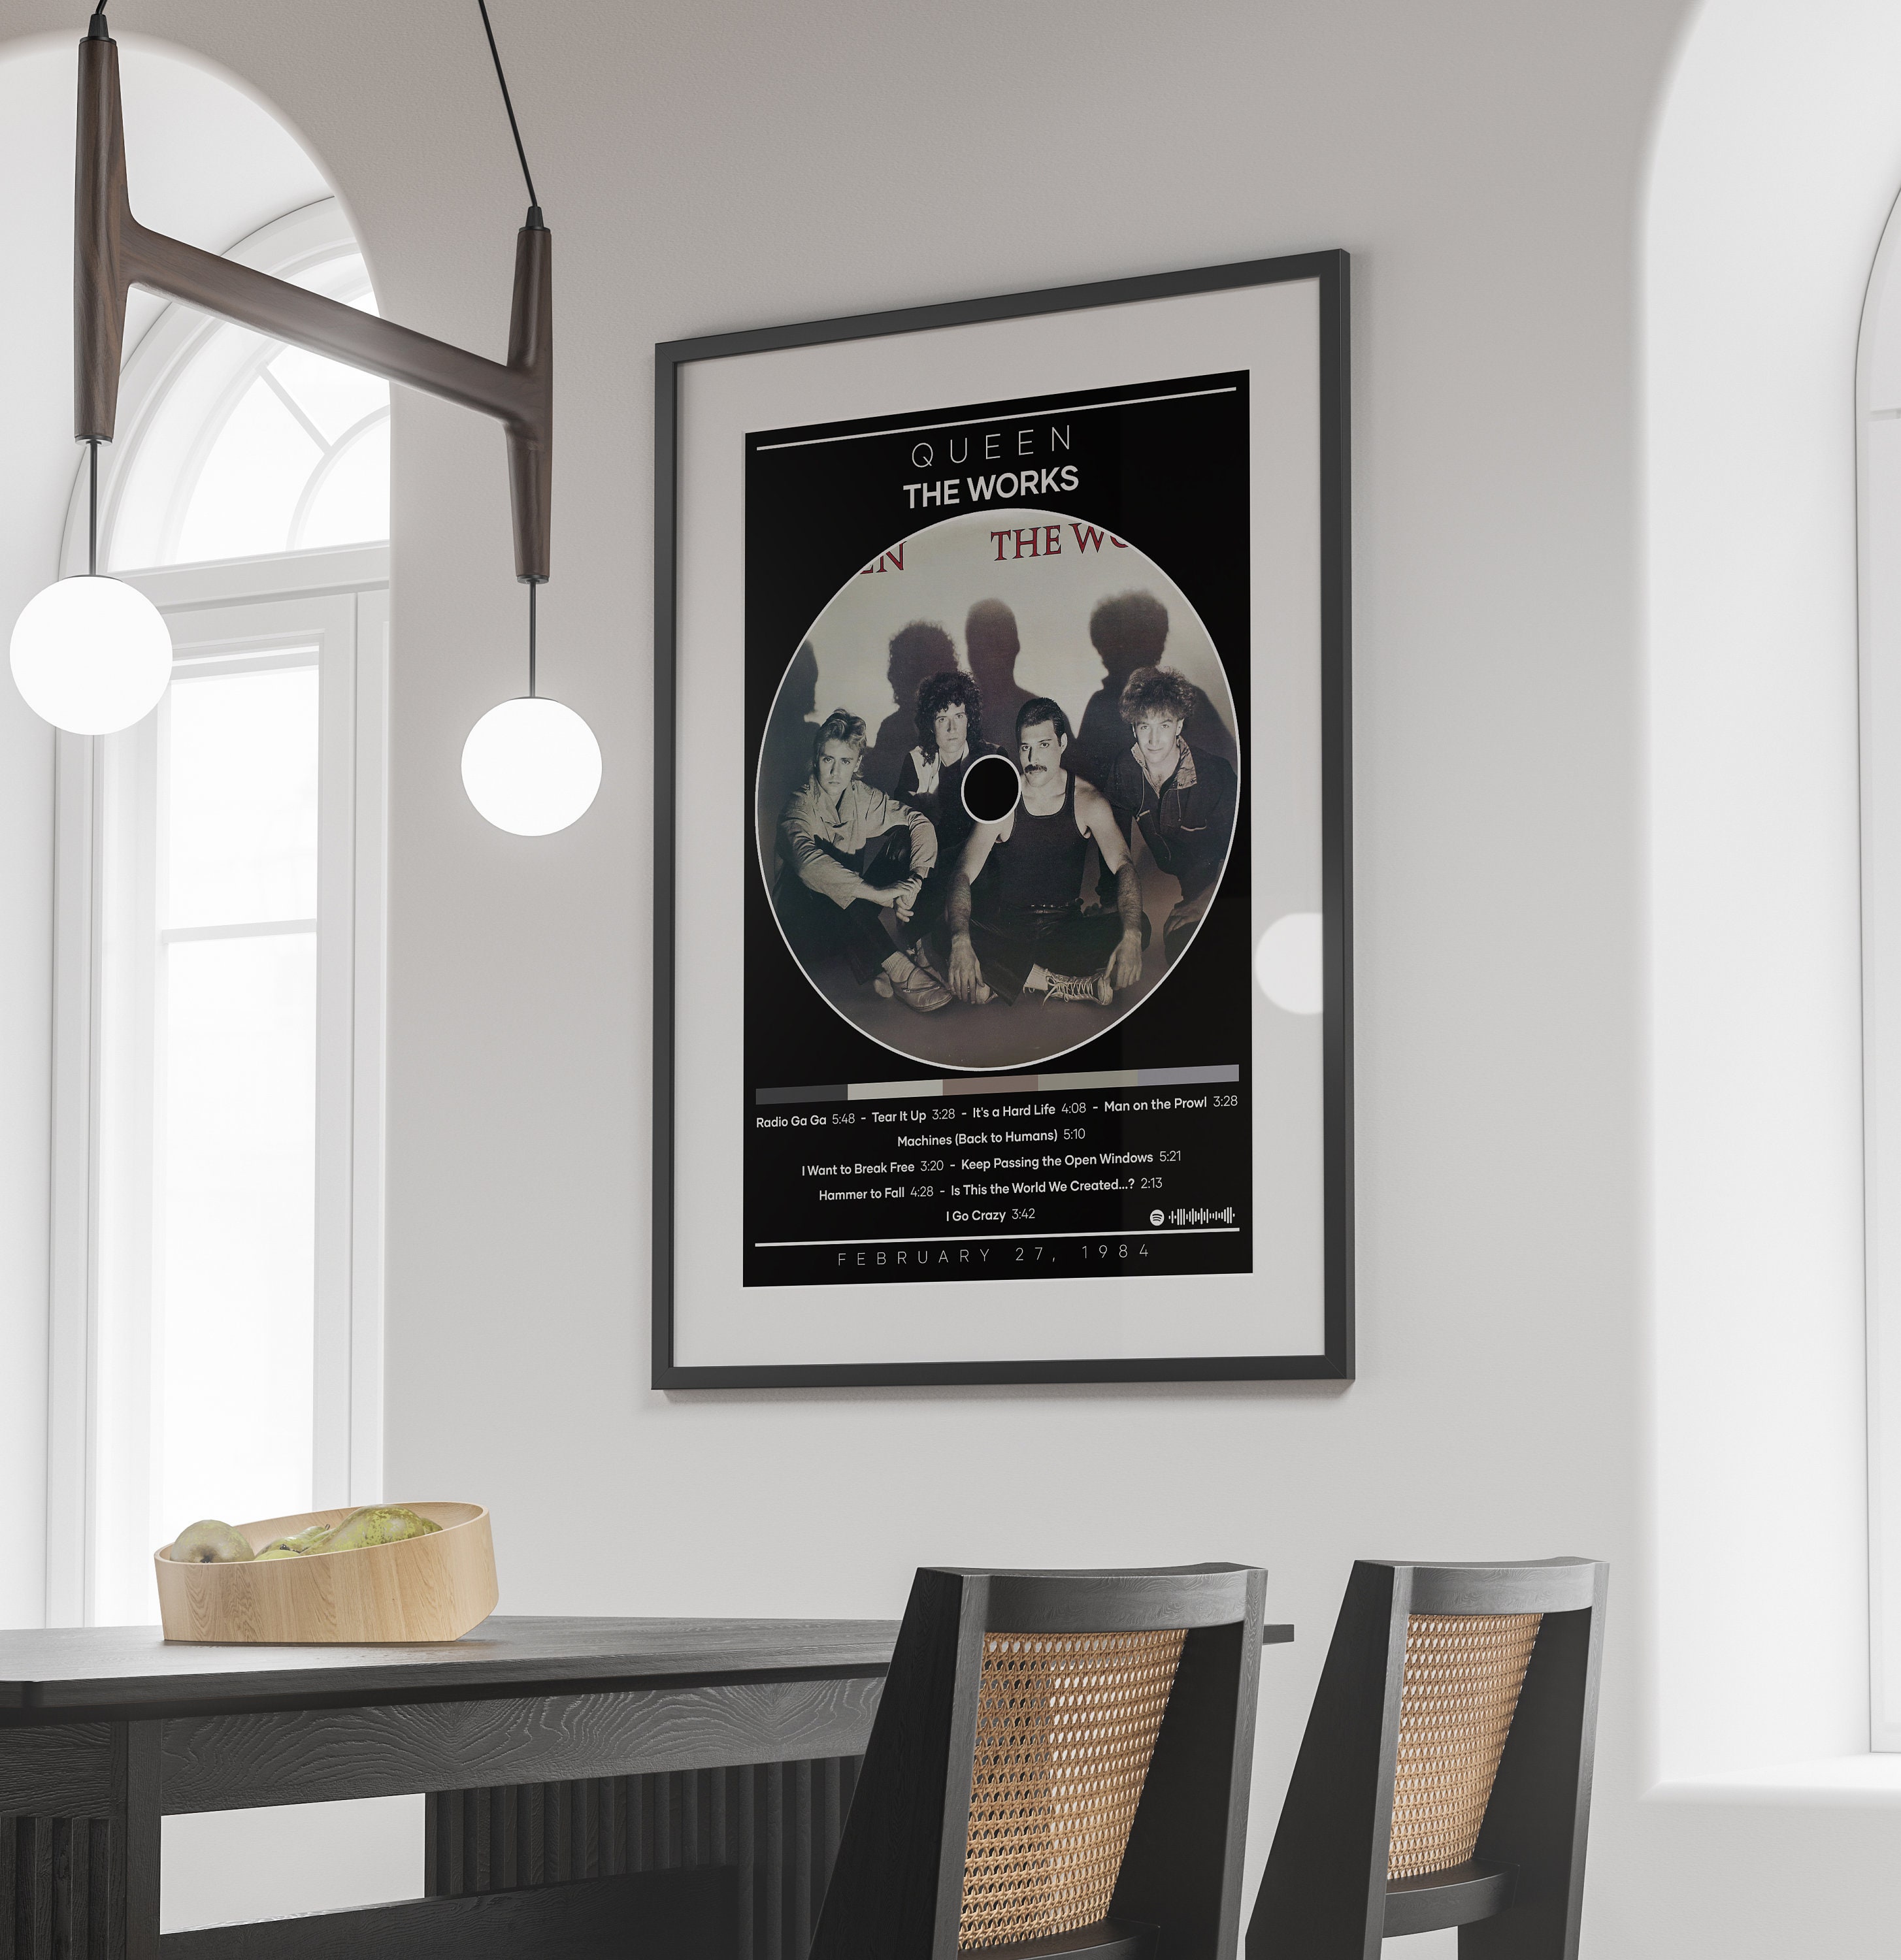 Queen Poster Print | The Works Poster | Rock Music Poster